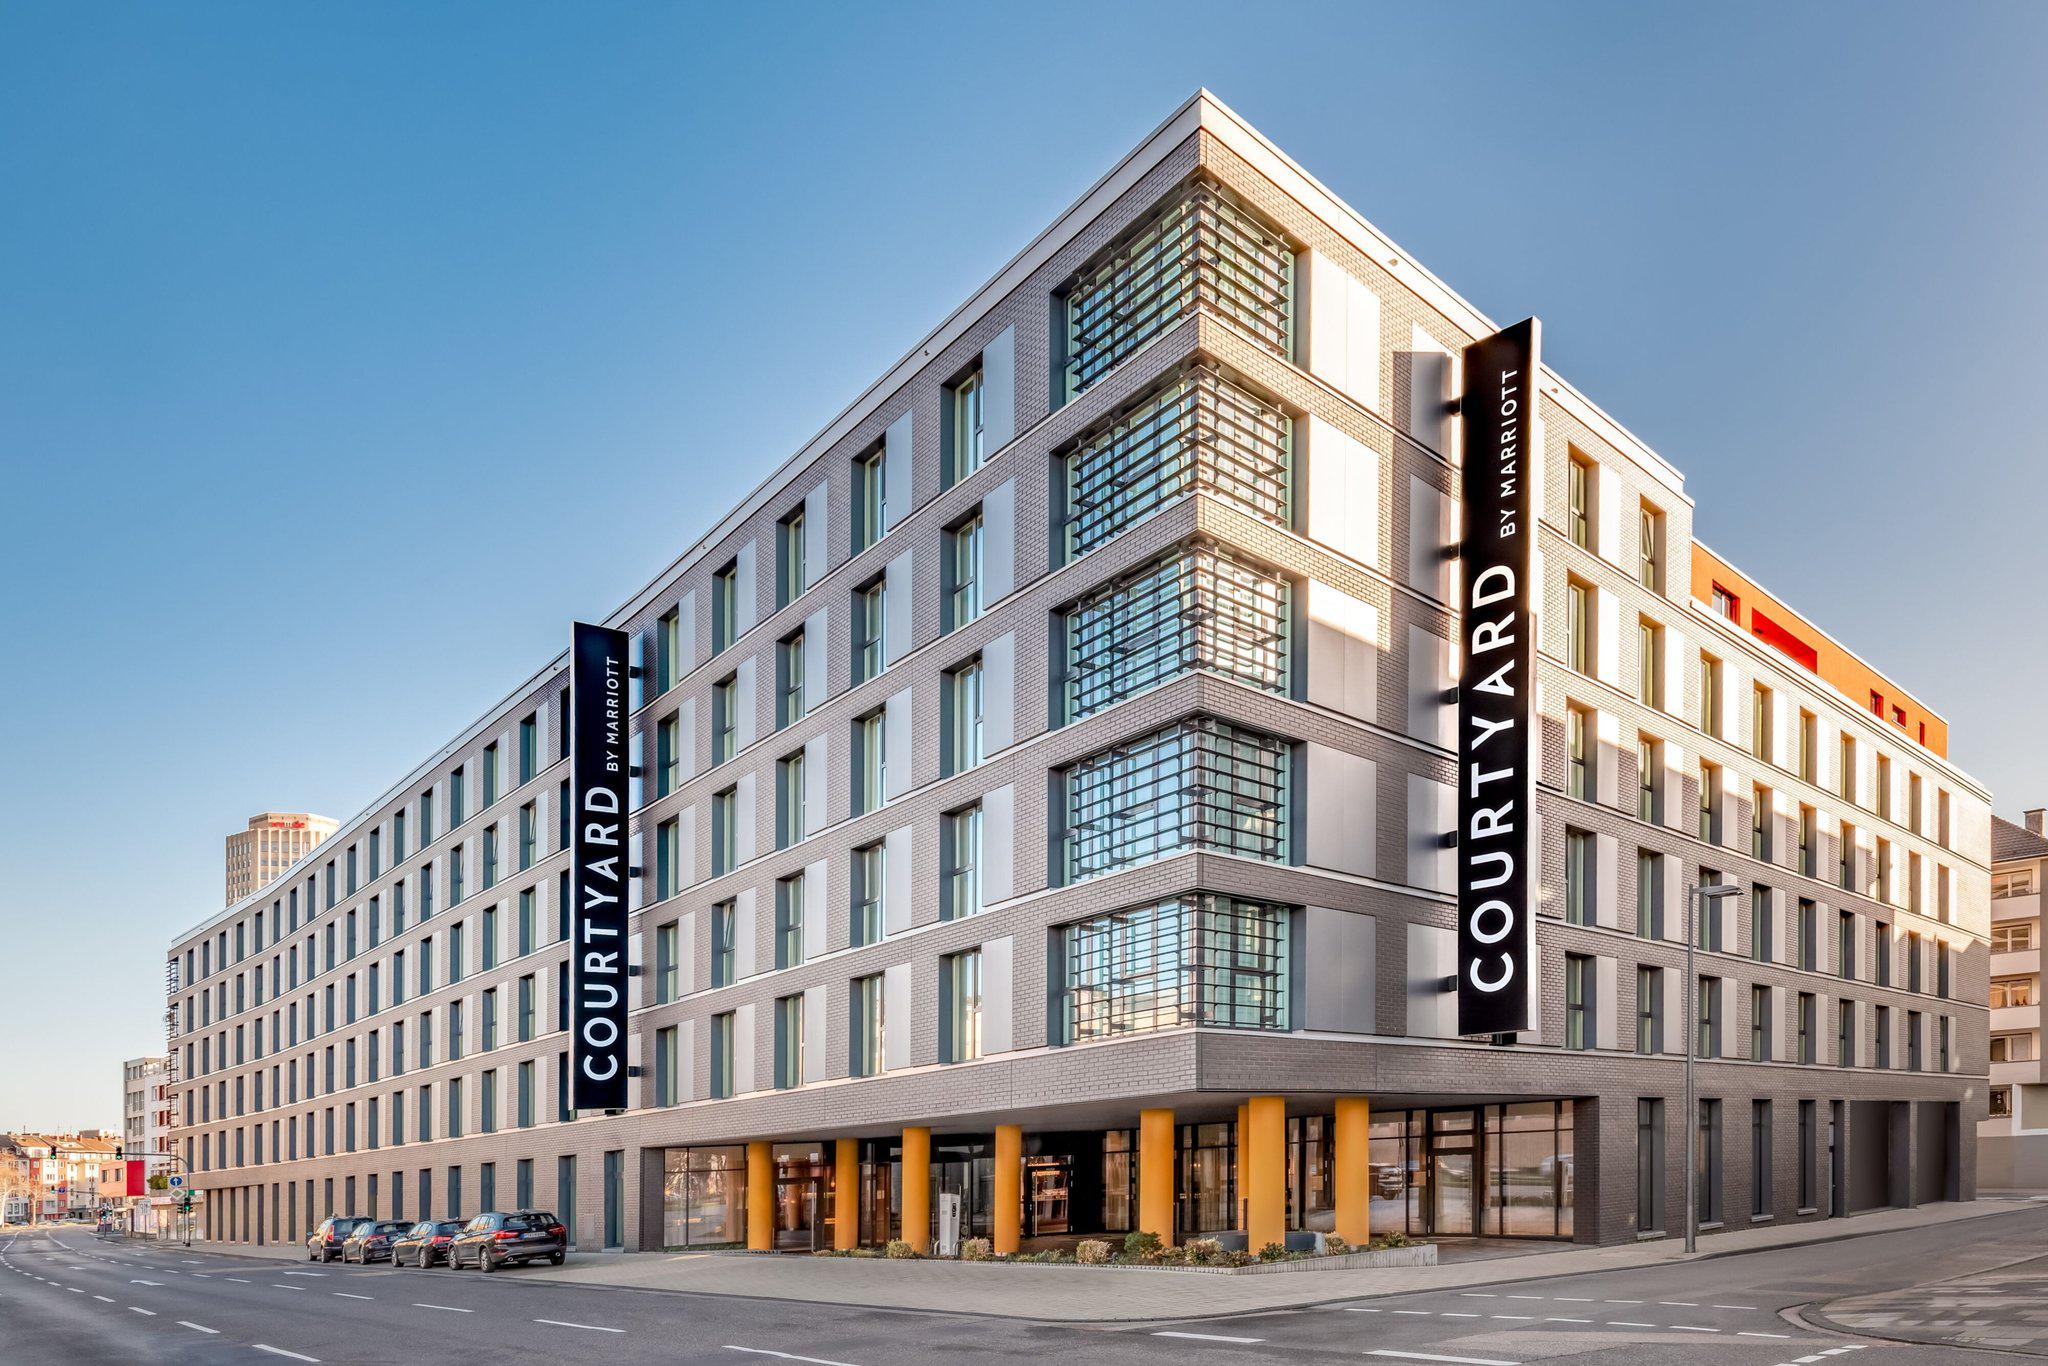 Courtyard by Marriott Cologne, Dagobertstrasse 23 in Cologne